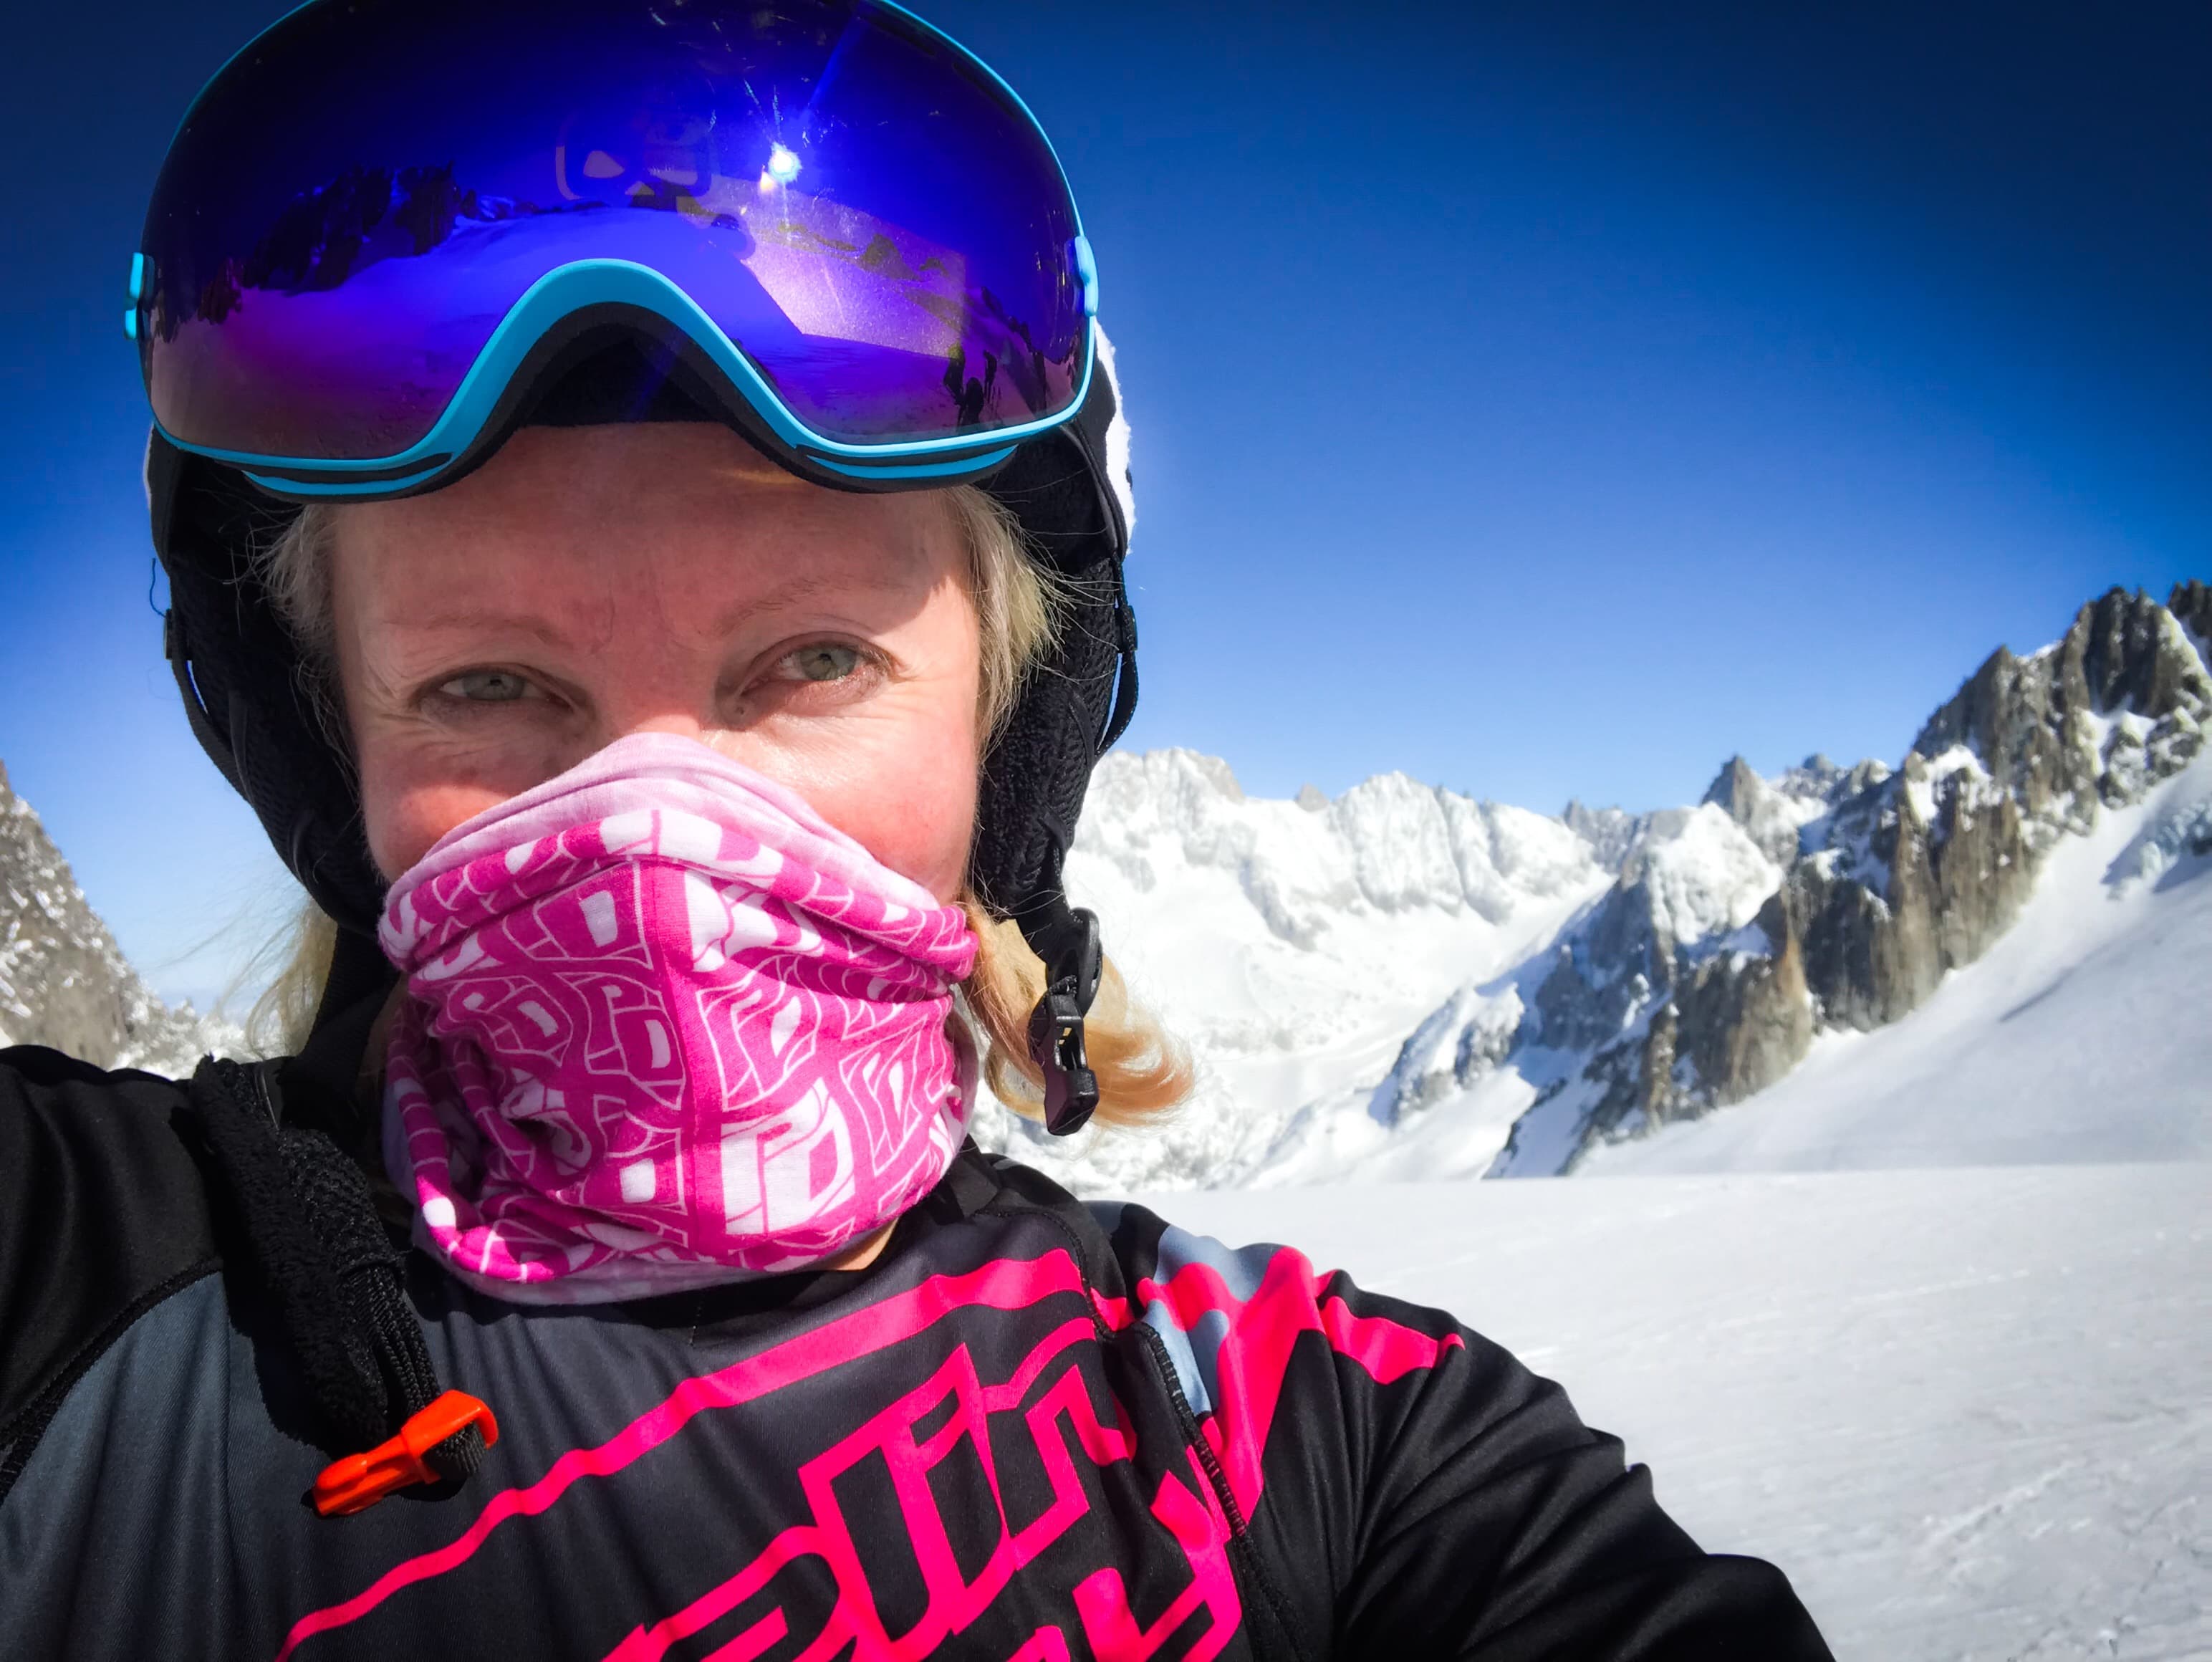 Maxine Tate takes a selfie while skiing in the mountains